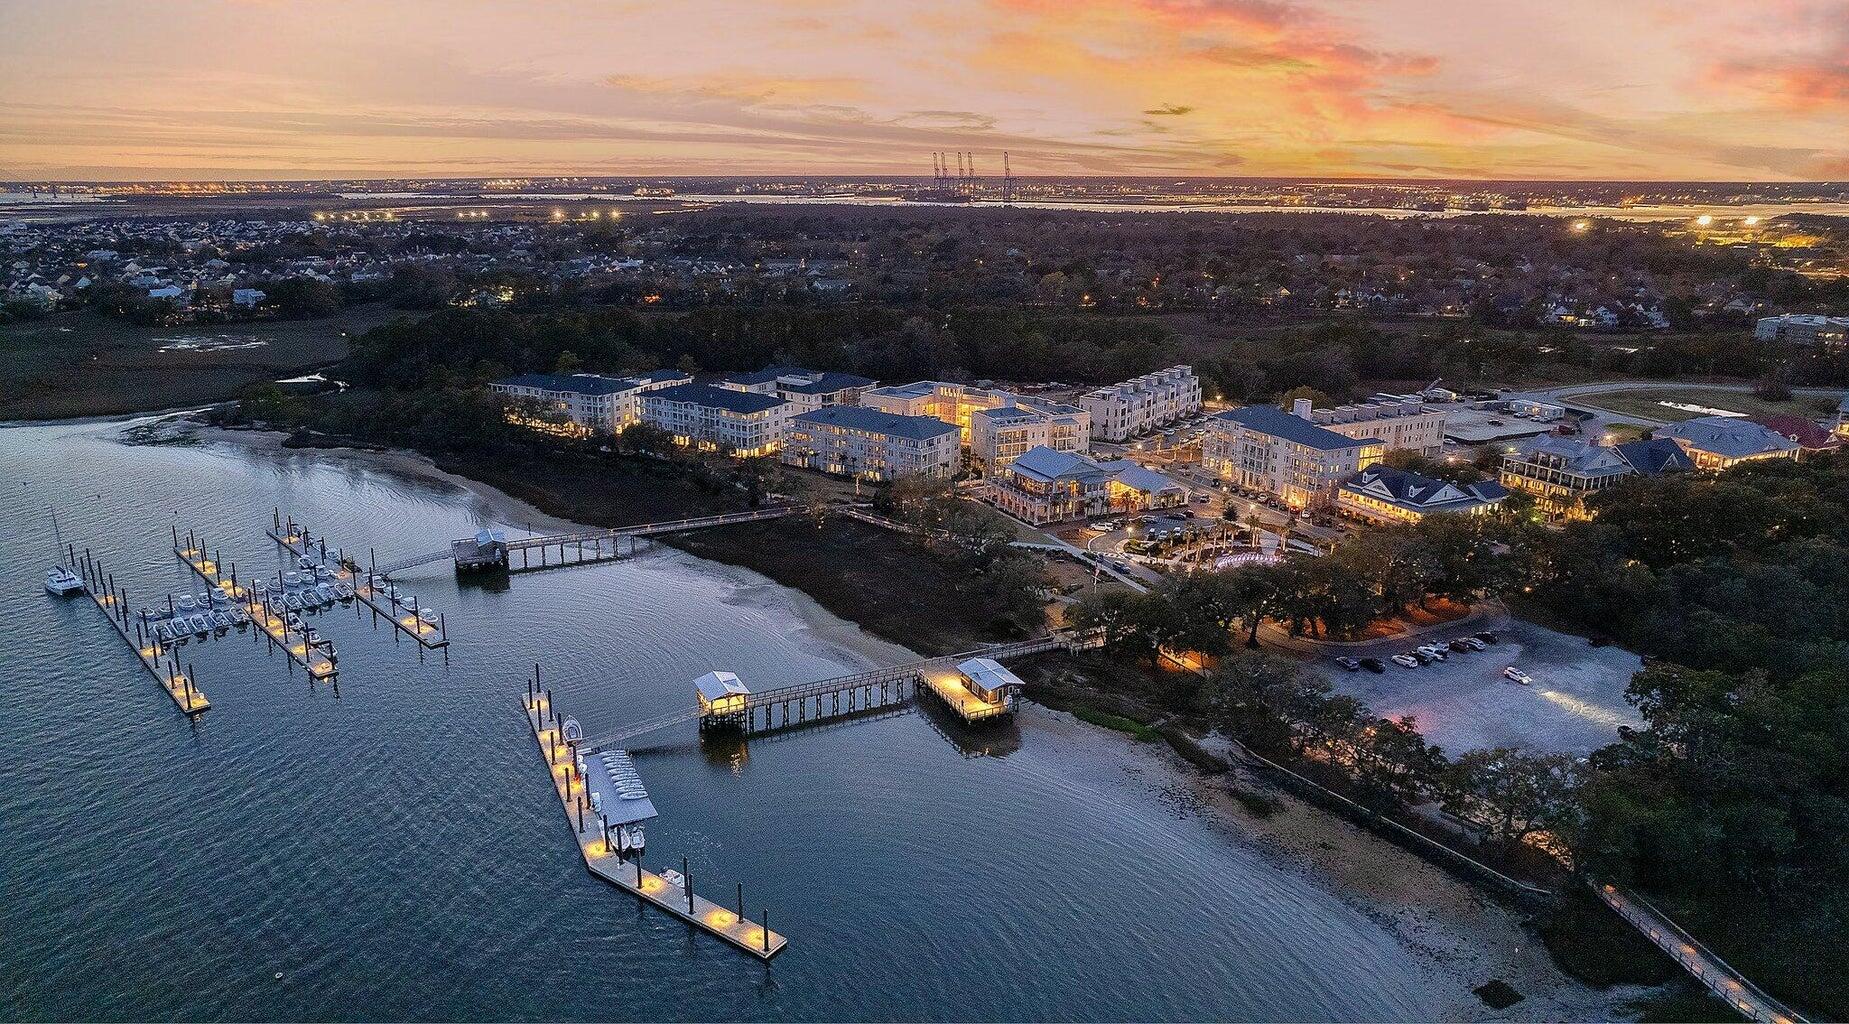 Aerial of Waterfront